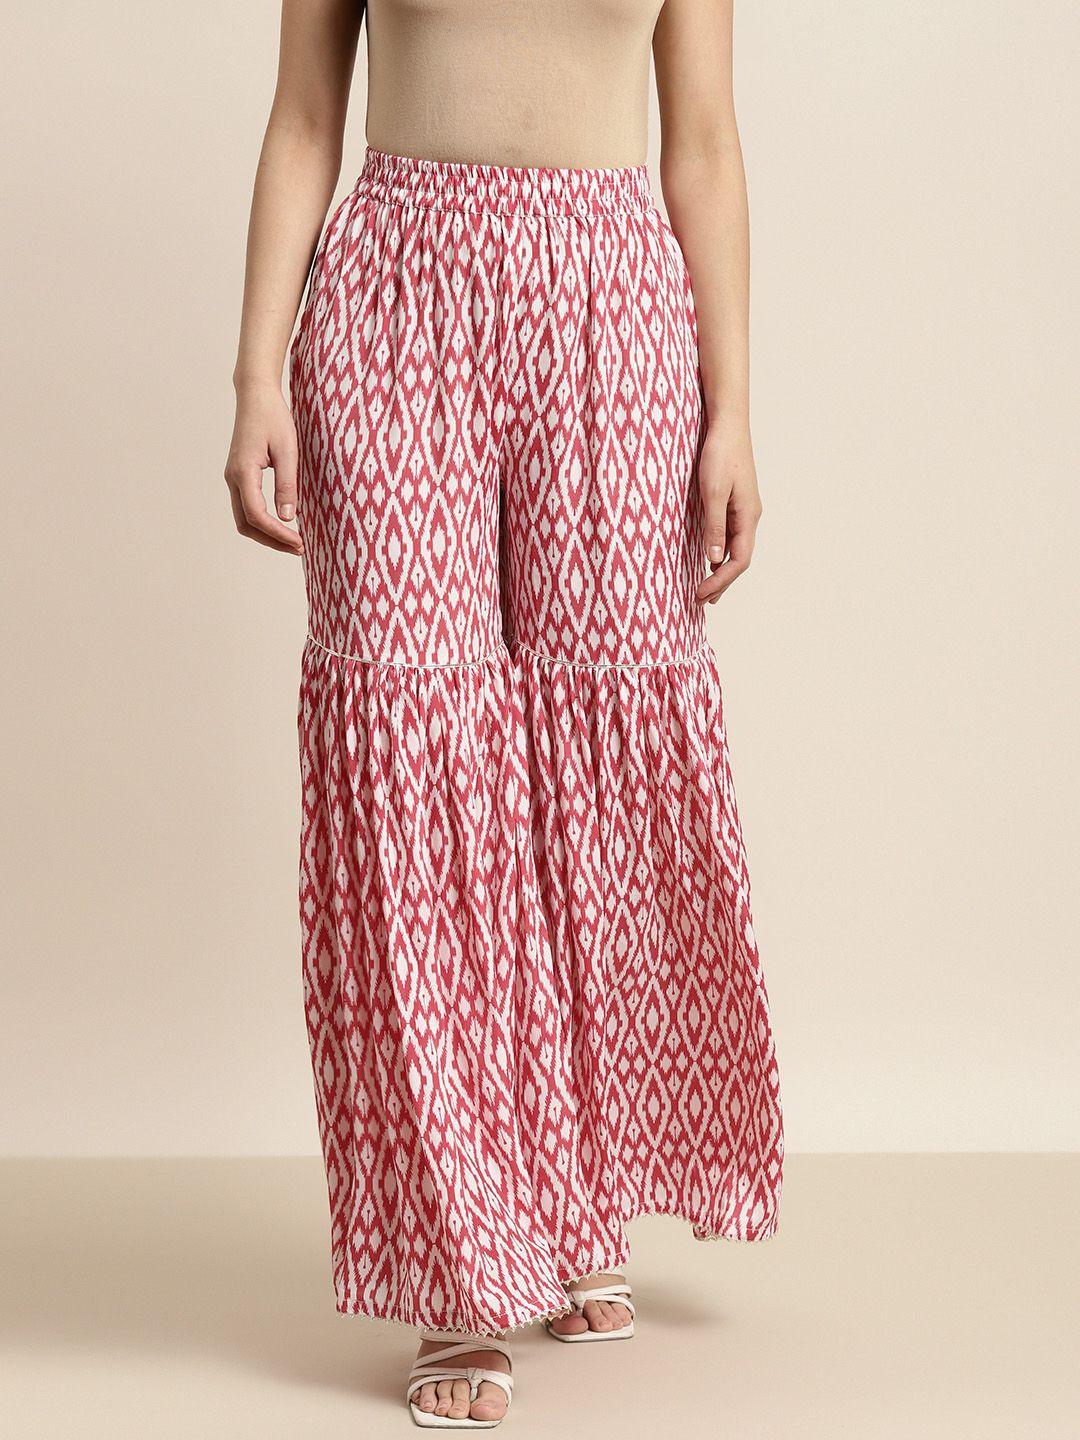 shae by sassafras women red & white printed flared pleated sharara pants